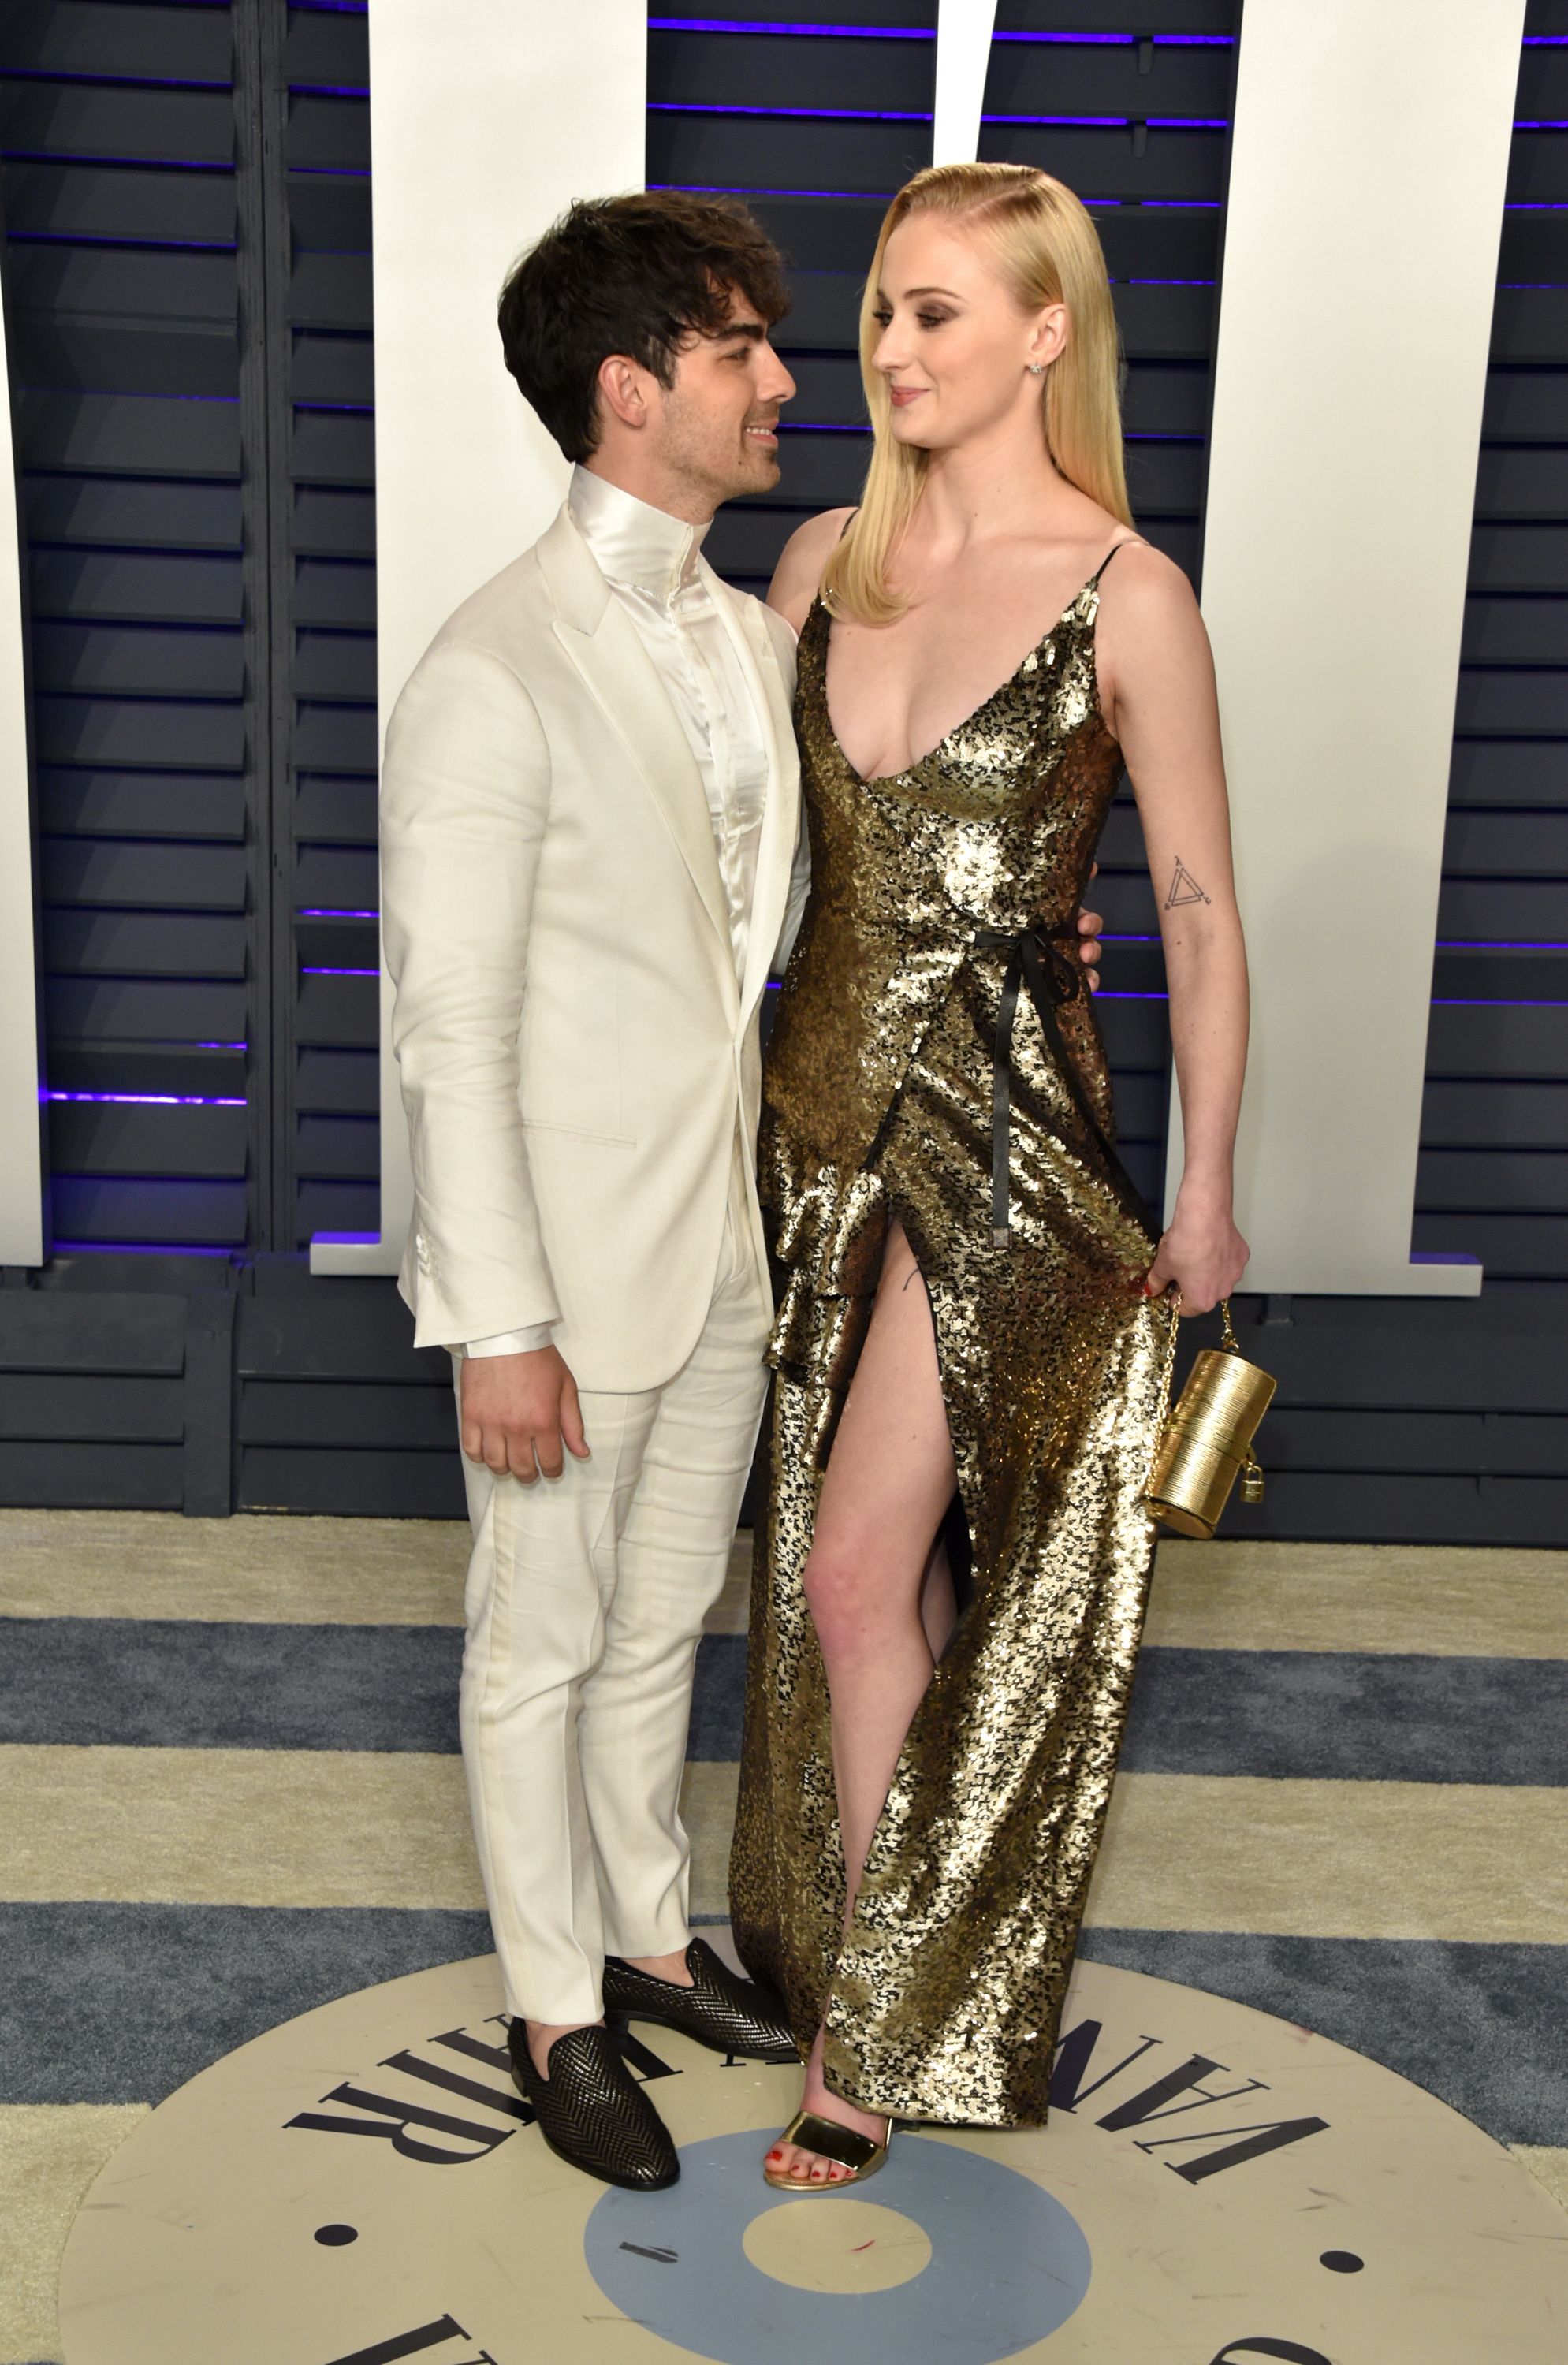 Joe Jonas and Sophie Turner at the "Vanity Fair" Oscar Party on February 24, 2019, in Beverly Hills, California | Photo: John Shearer/Getty Images